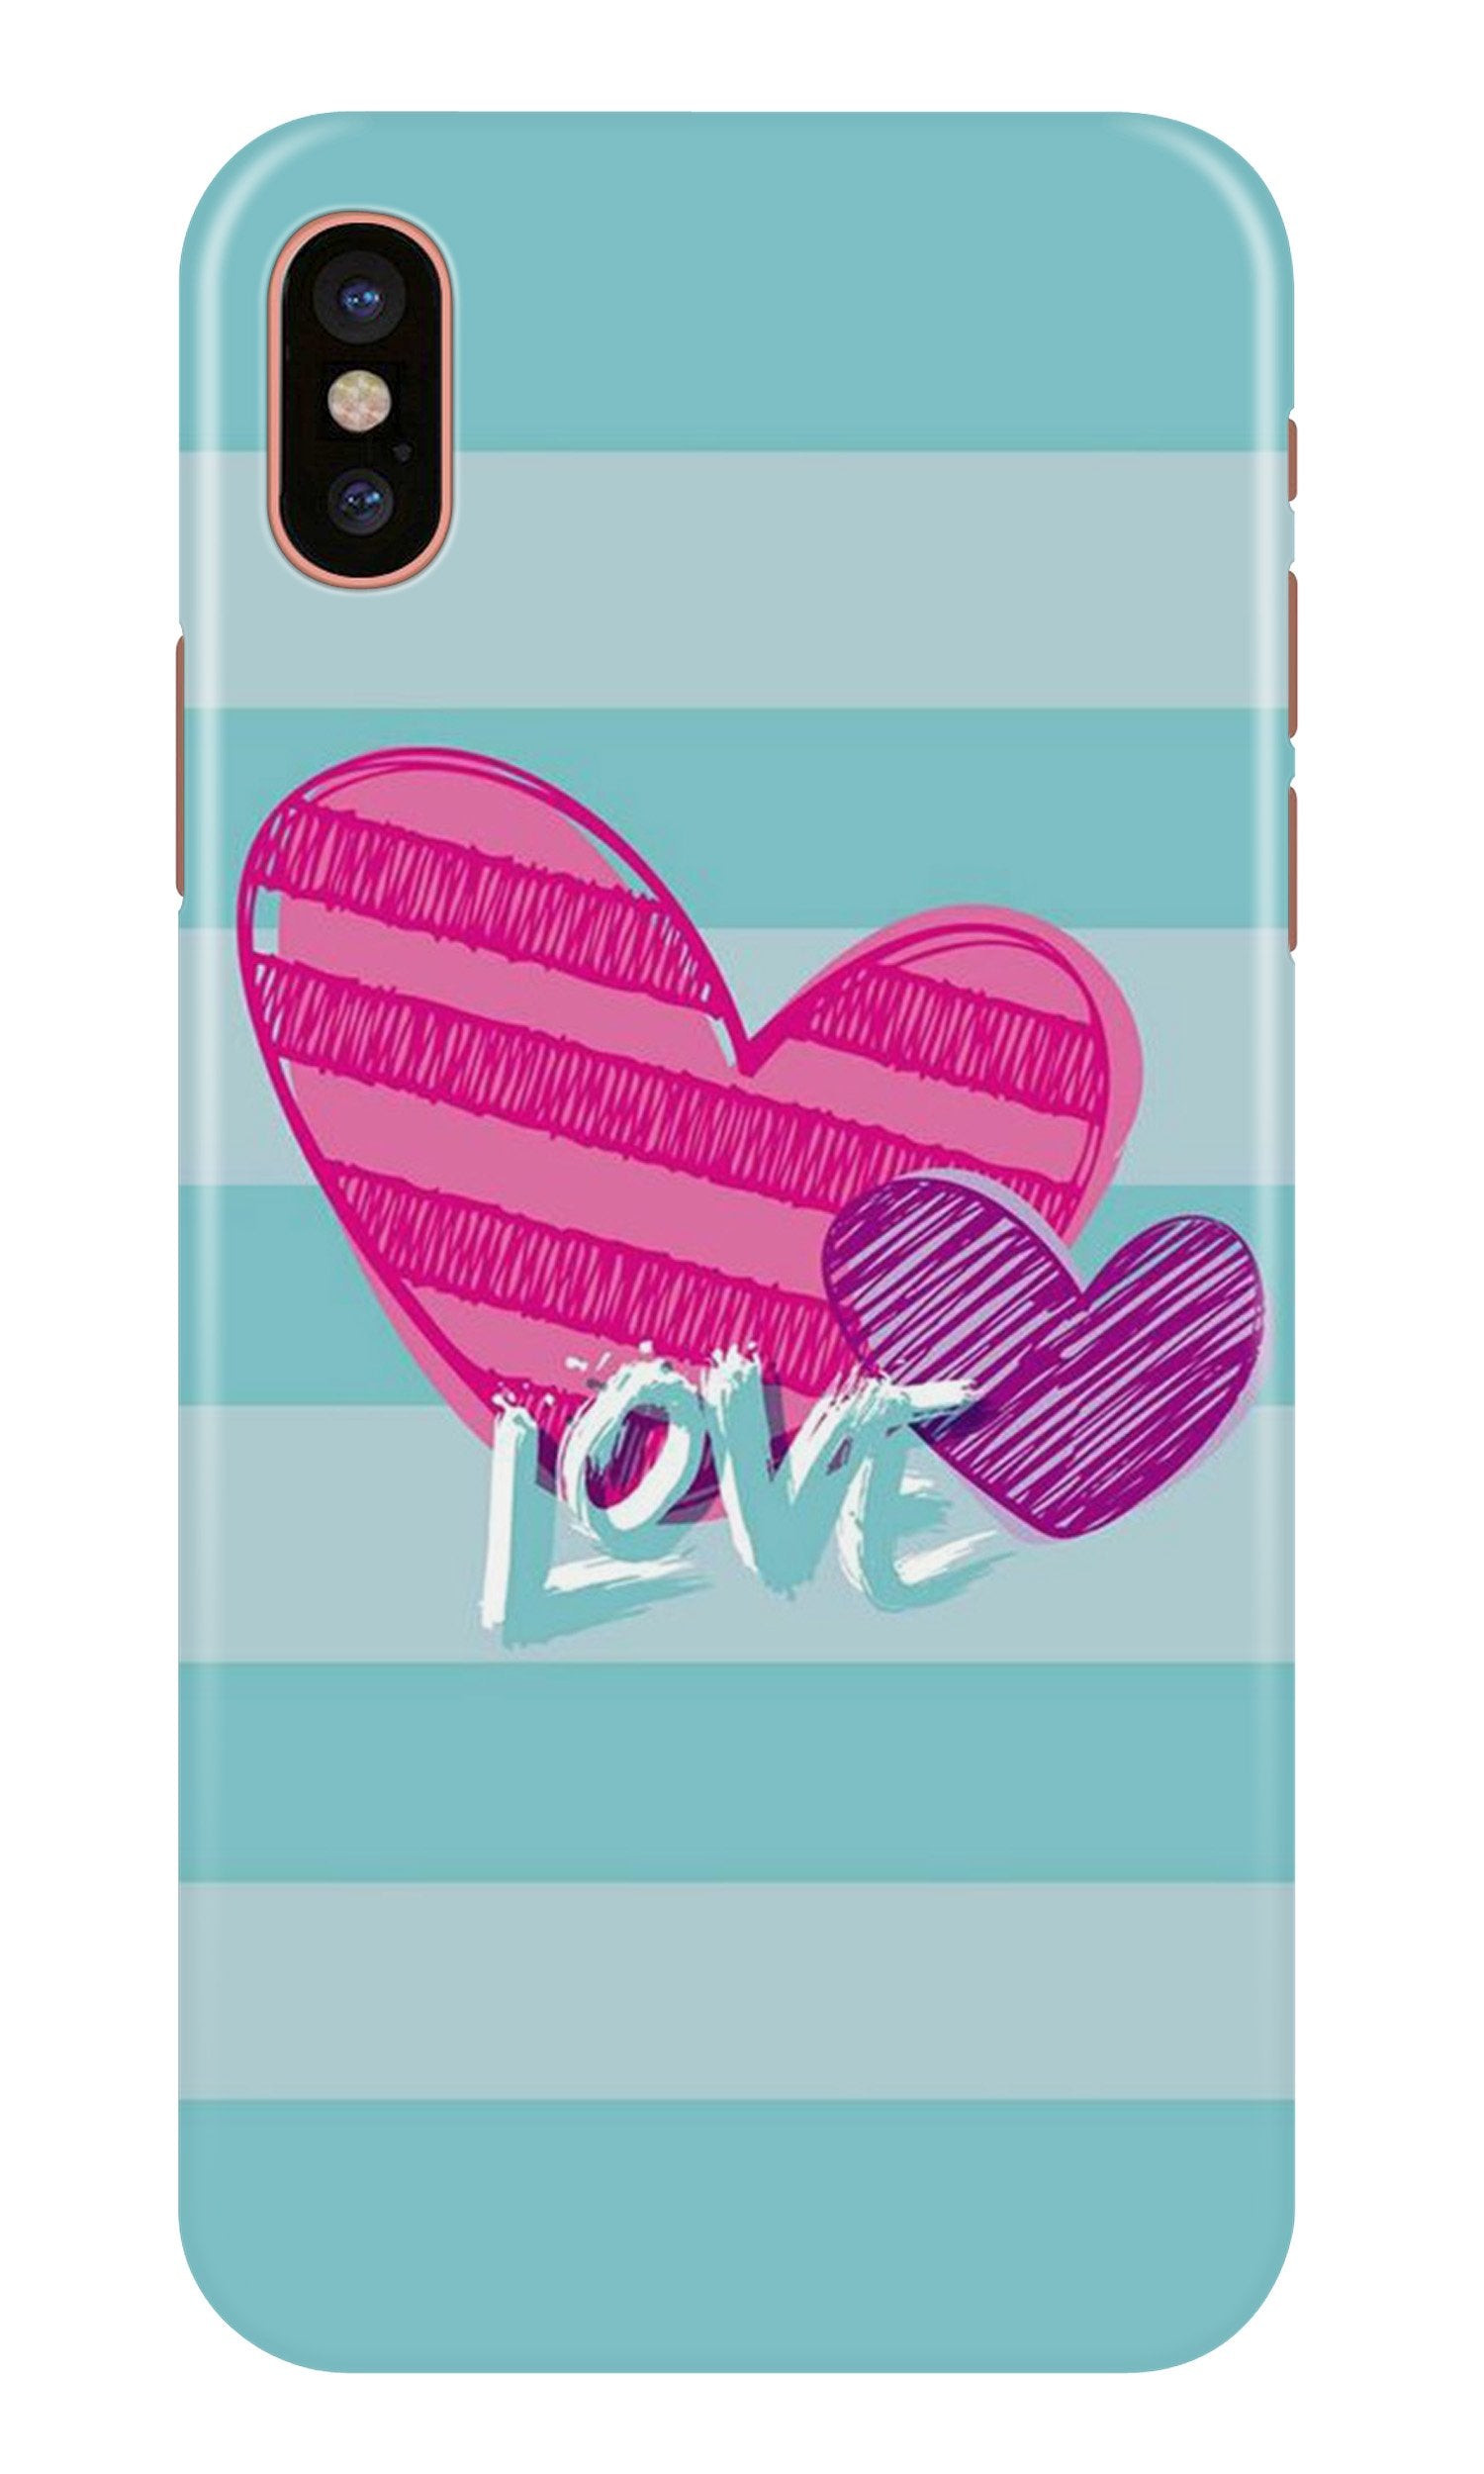 Love Case for iPhone Xr (Design No. 299)